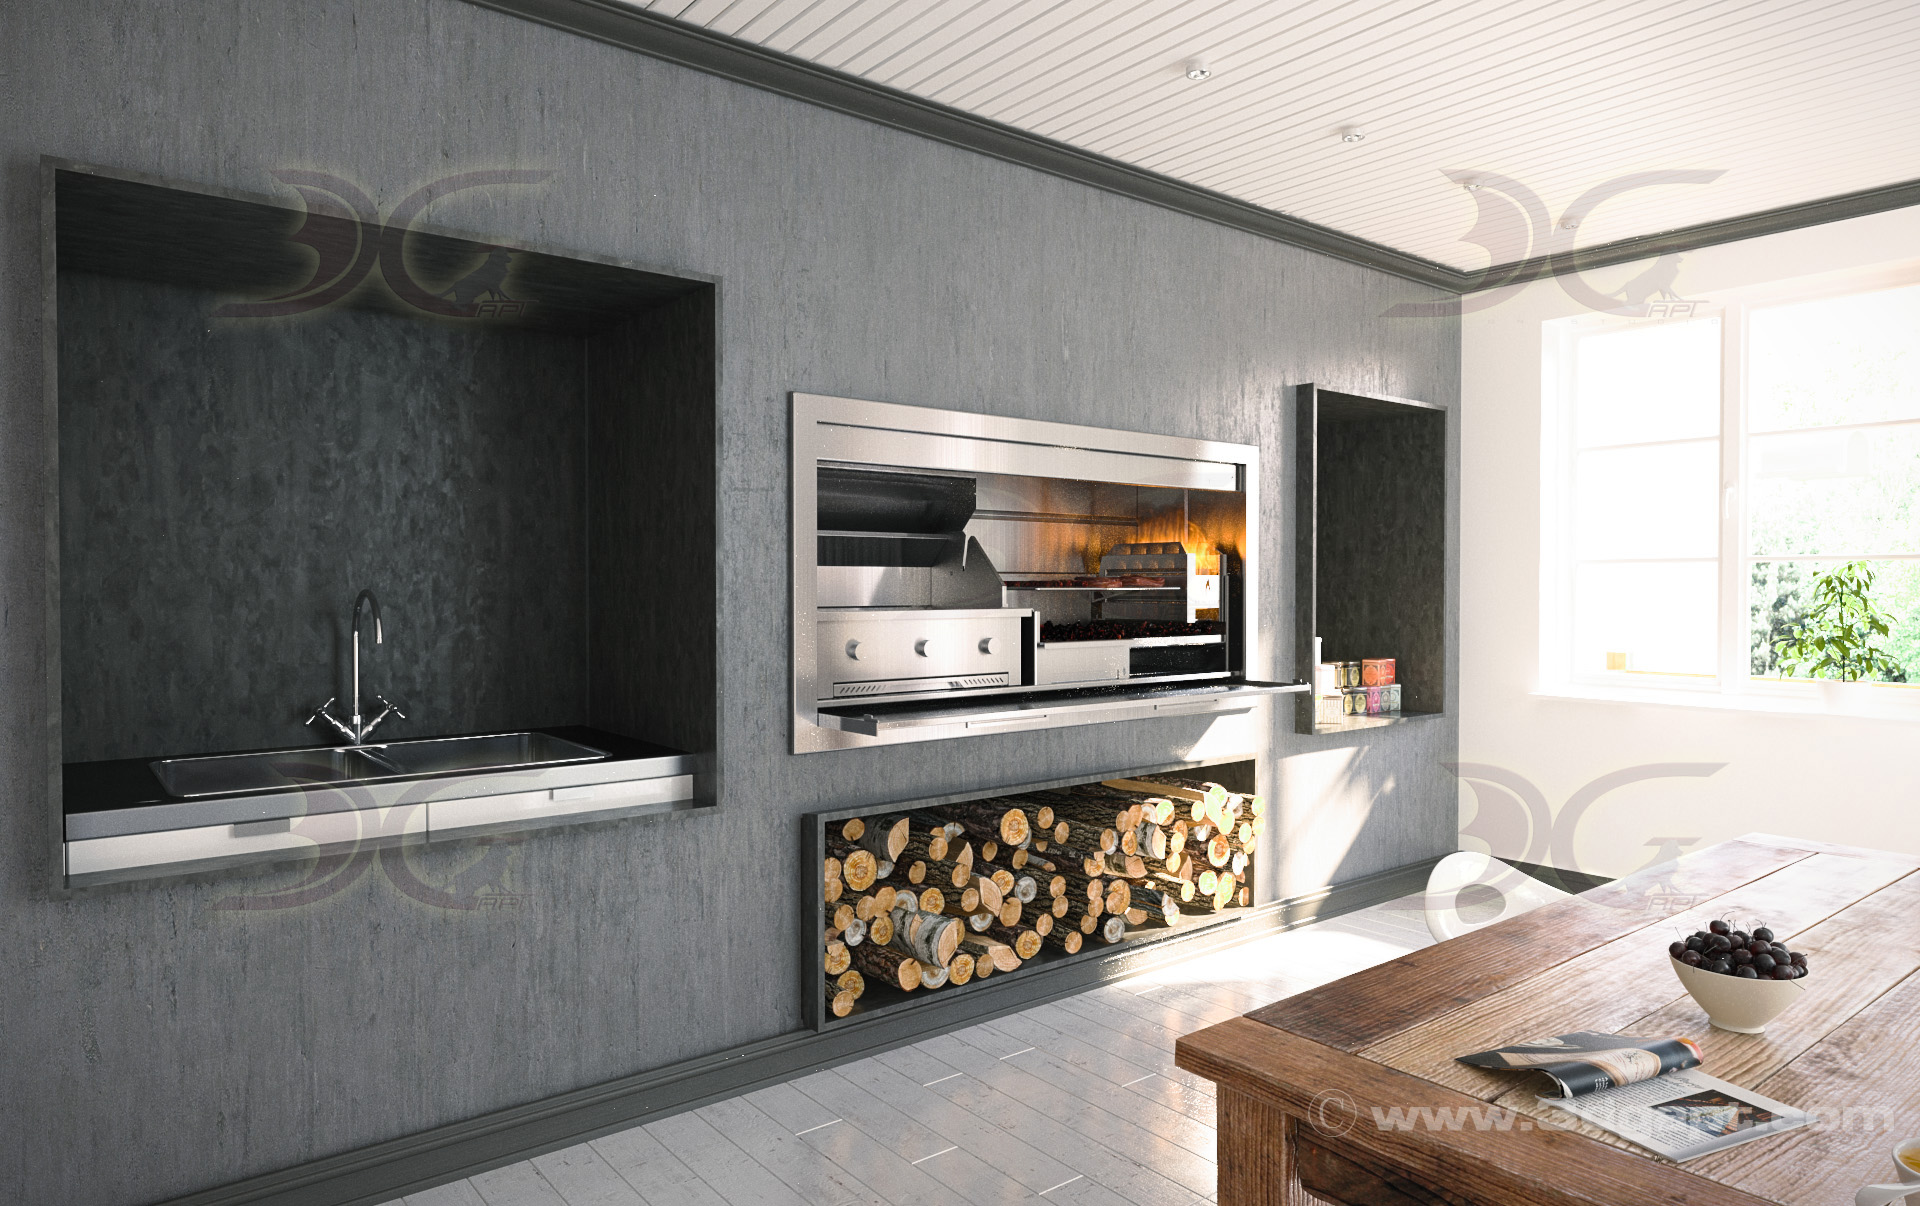 Kitchen with fireplace